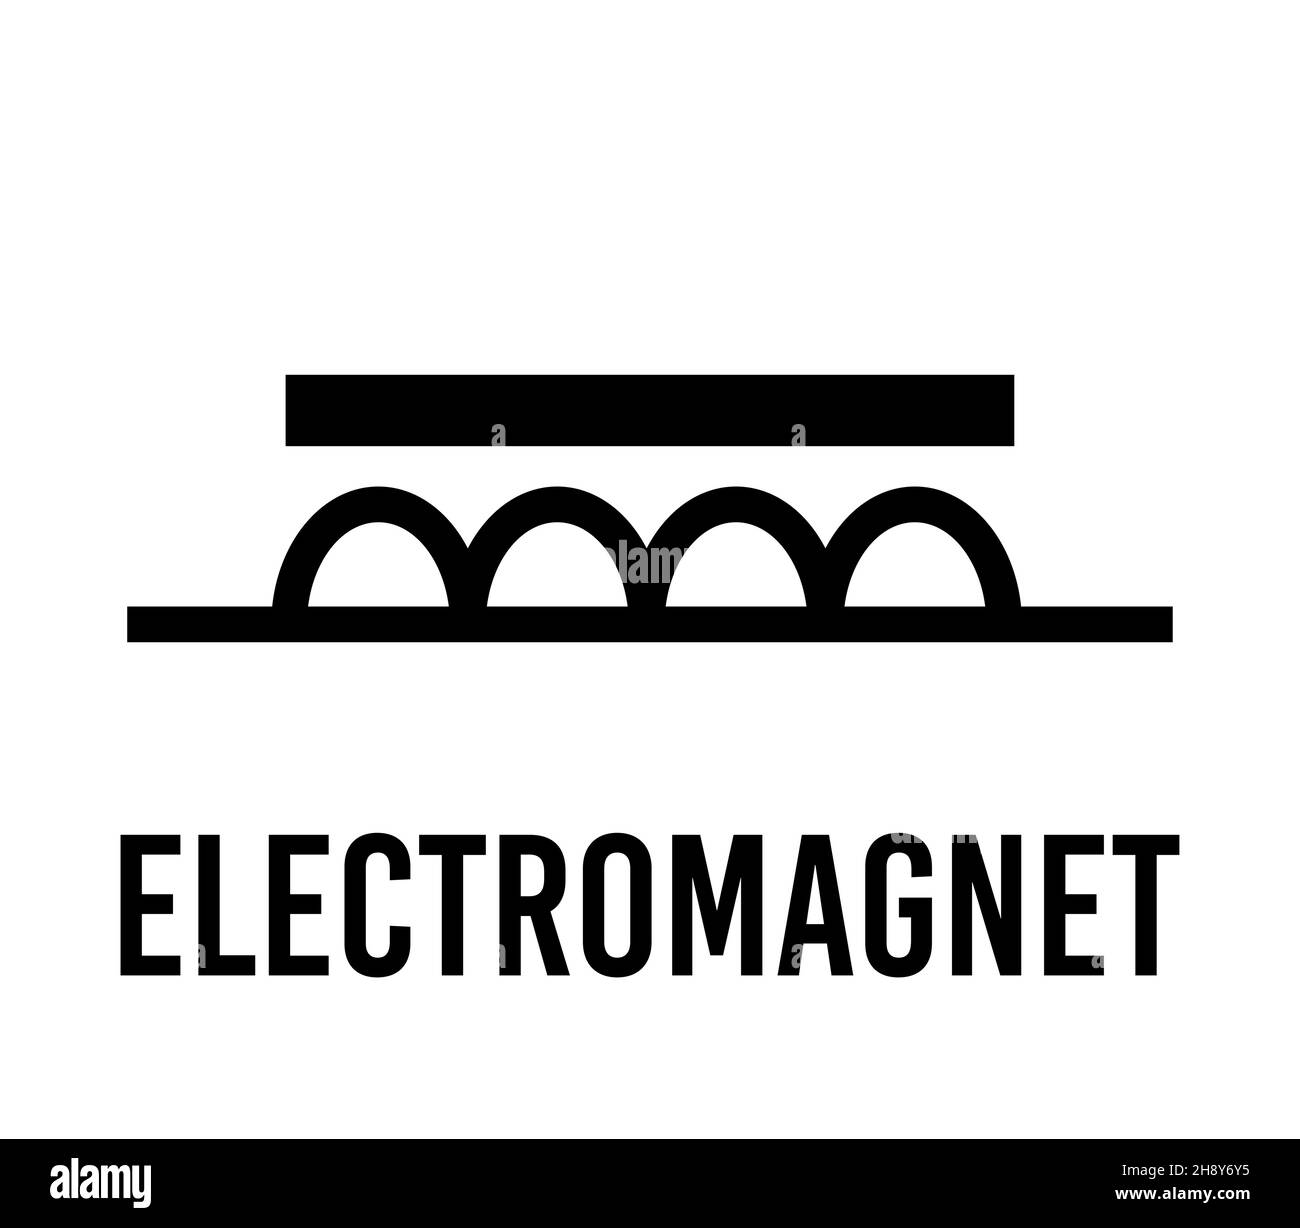 Electromagnet electronic component, vector icon flat design concept. Electricity physics scheme for education. Black on white background. Stock Vector